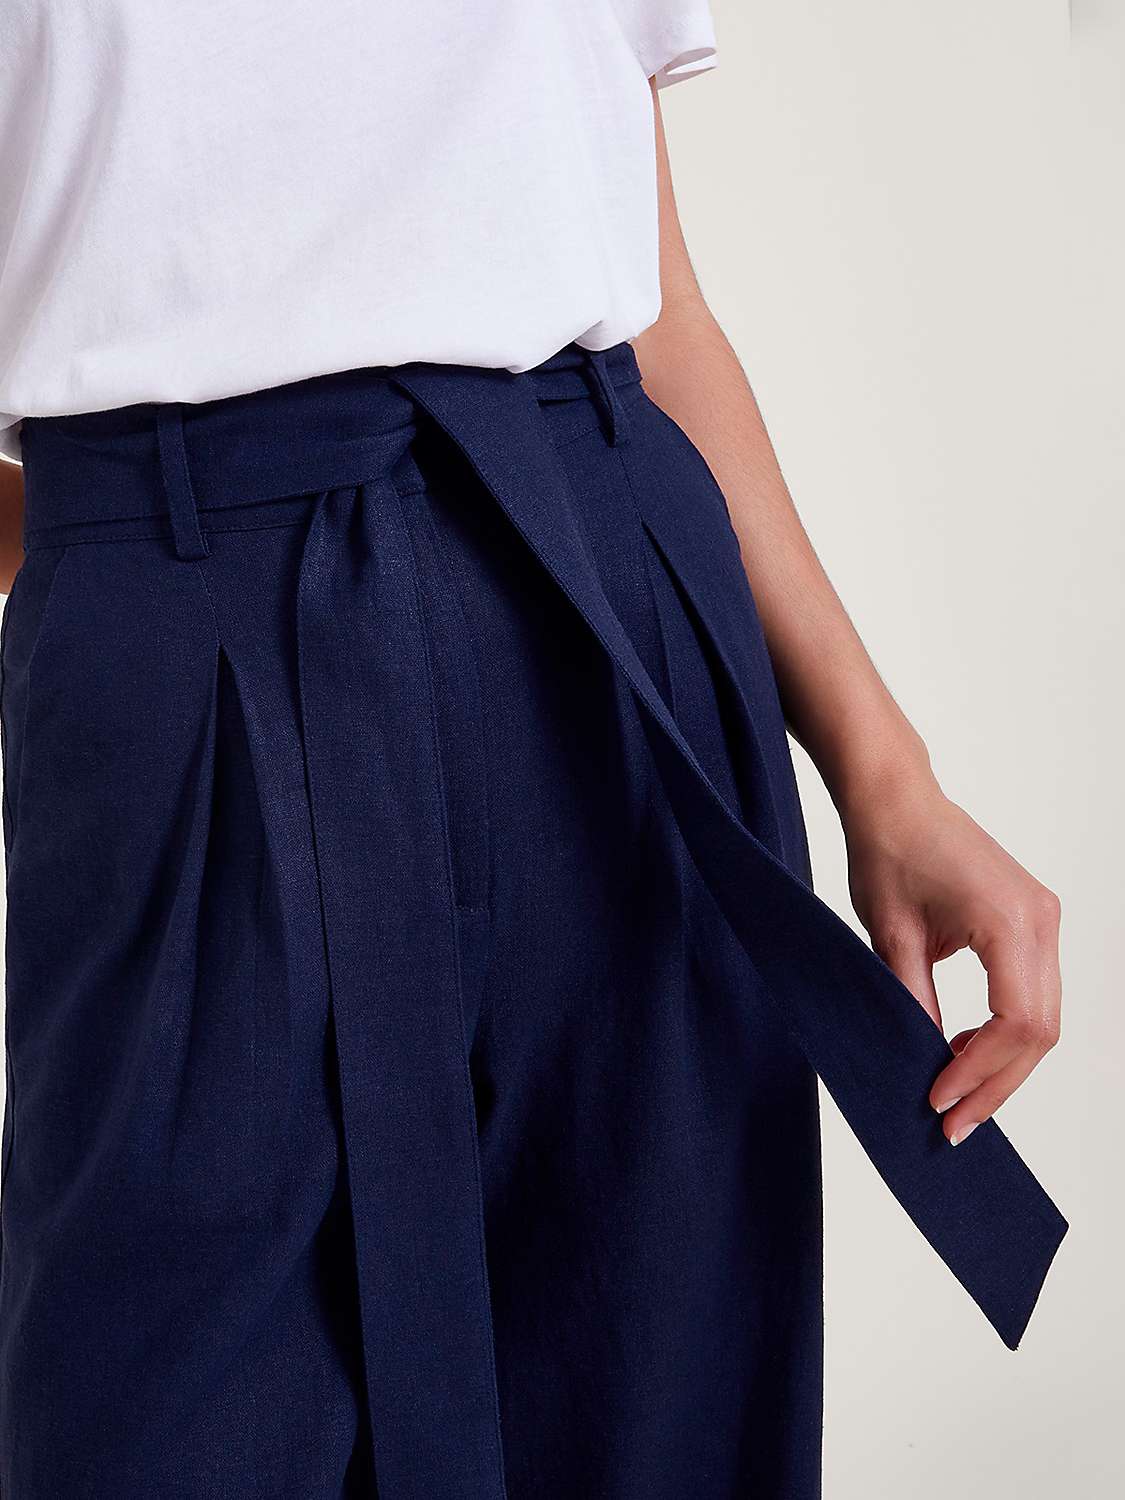 Buy Monsoon Mabel Linen Blend Trousers, Navy Online at johnlewis.com